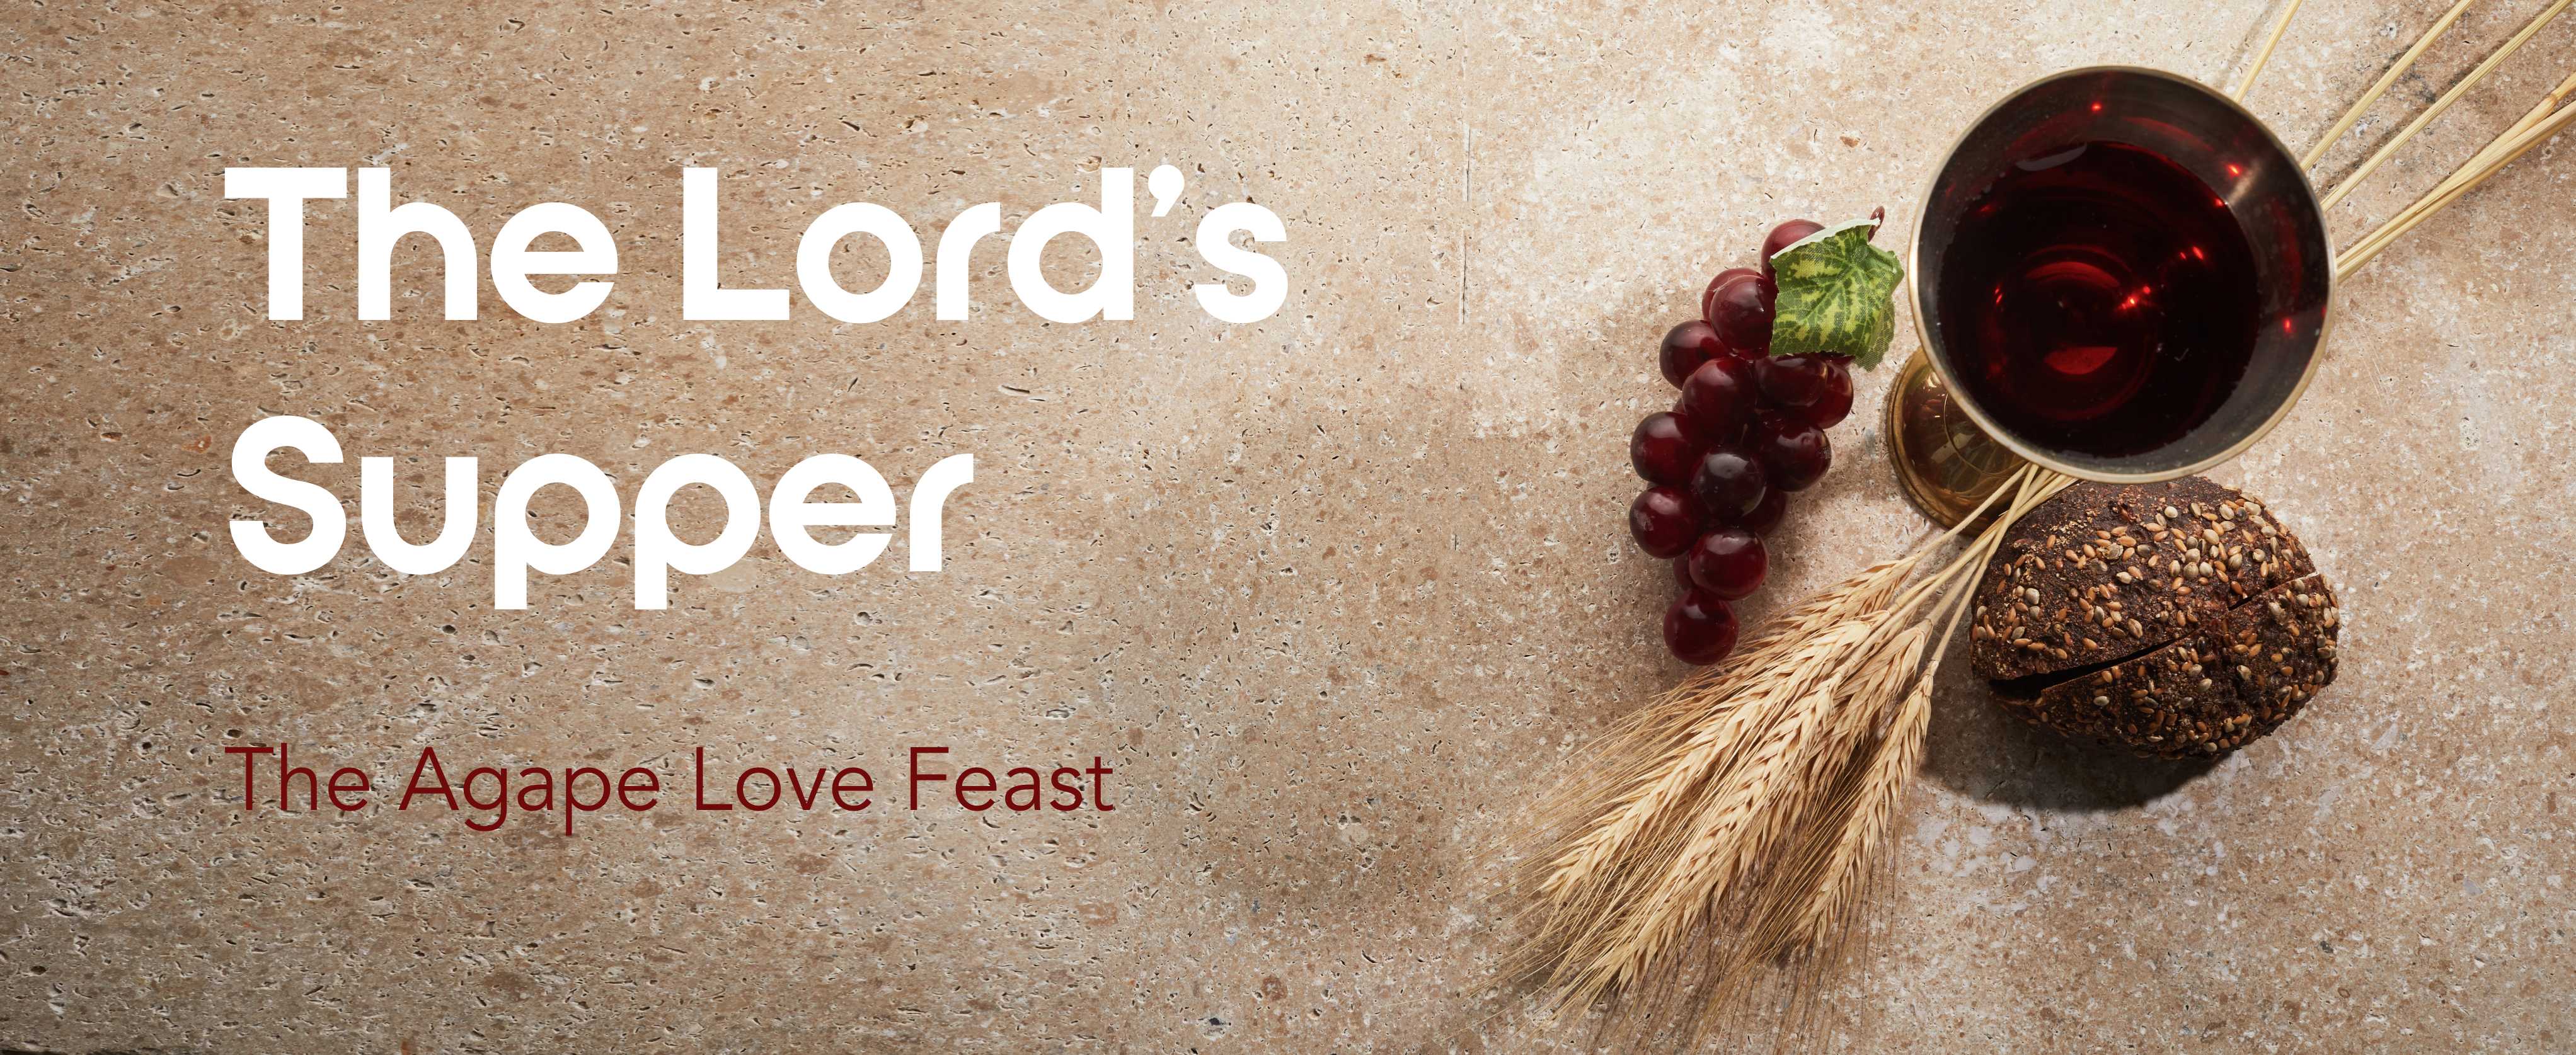 lord's supper: the agape love feast